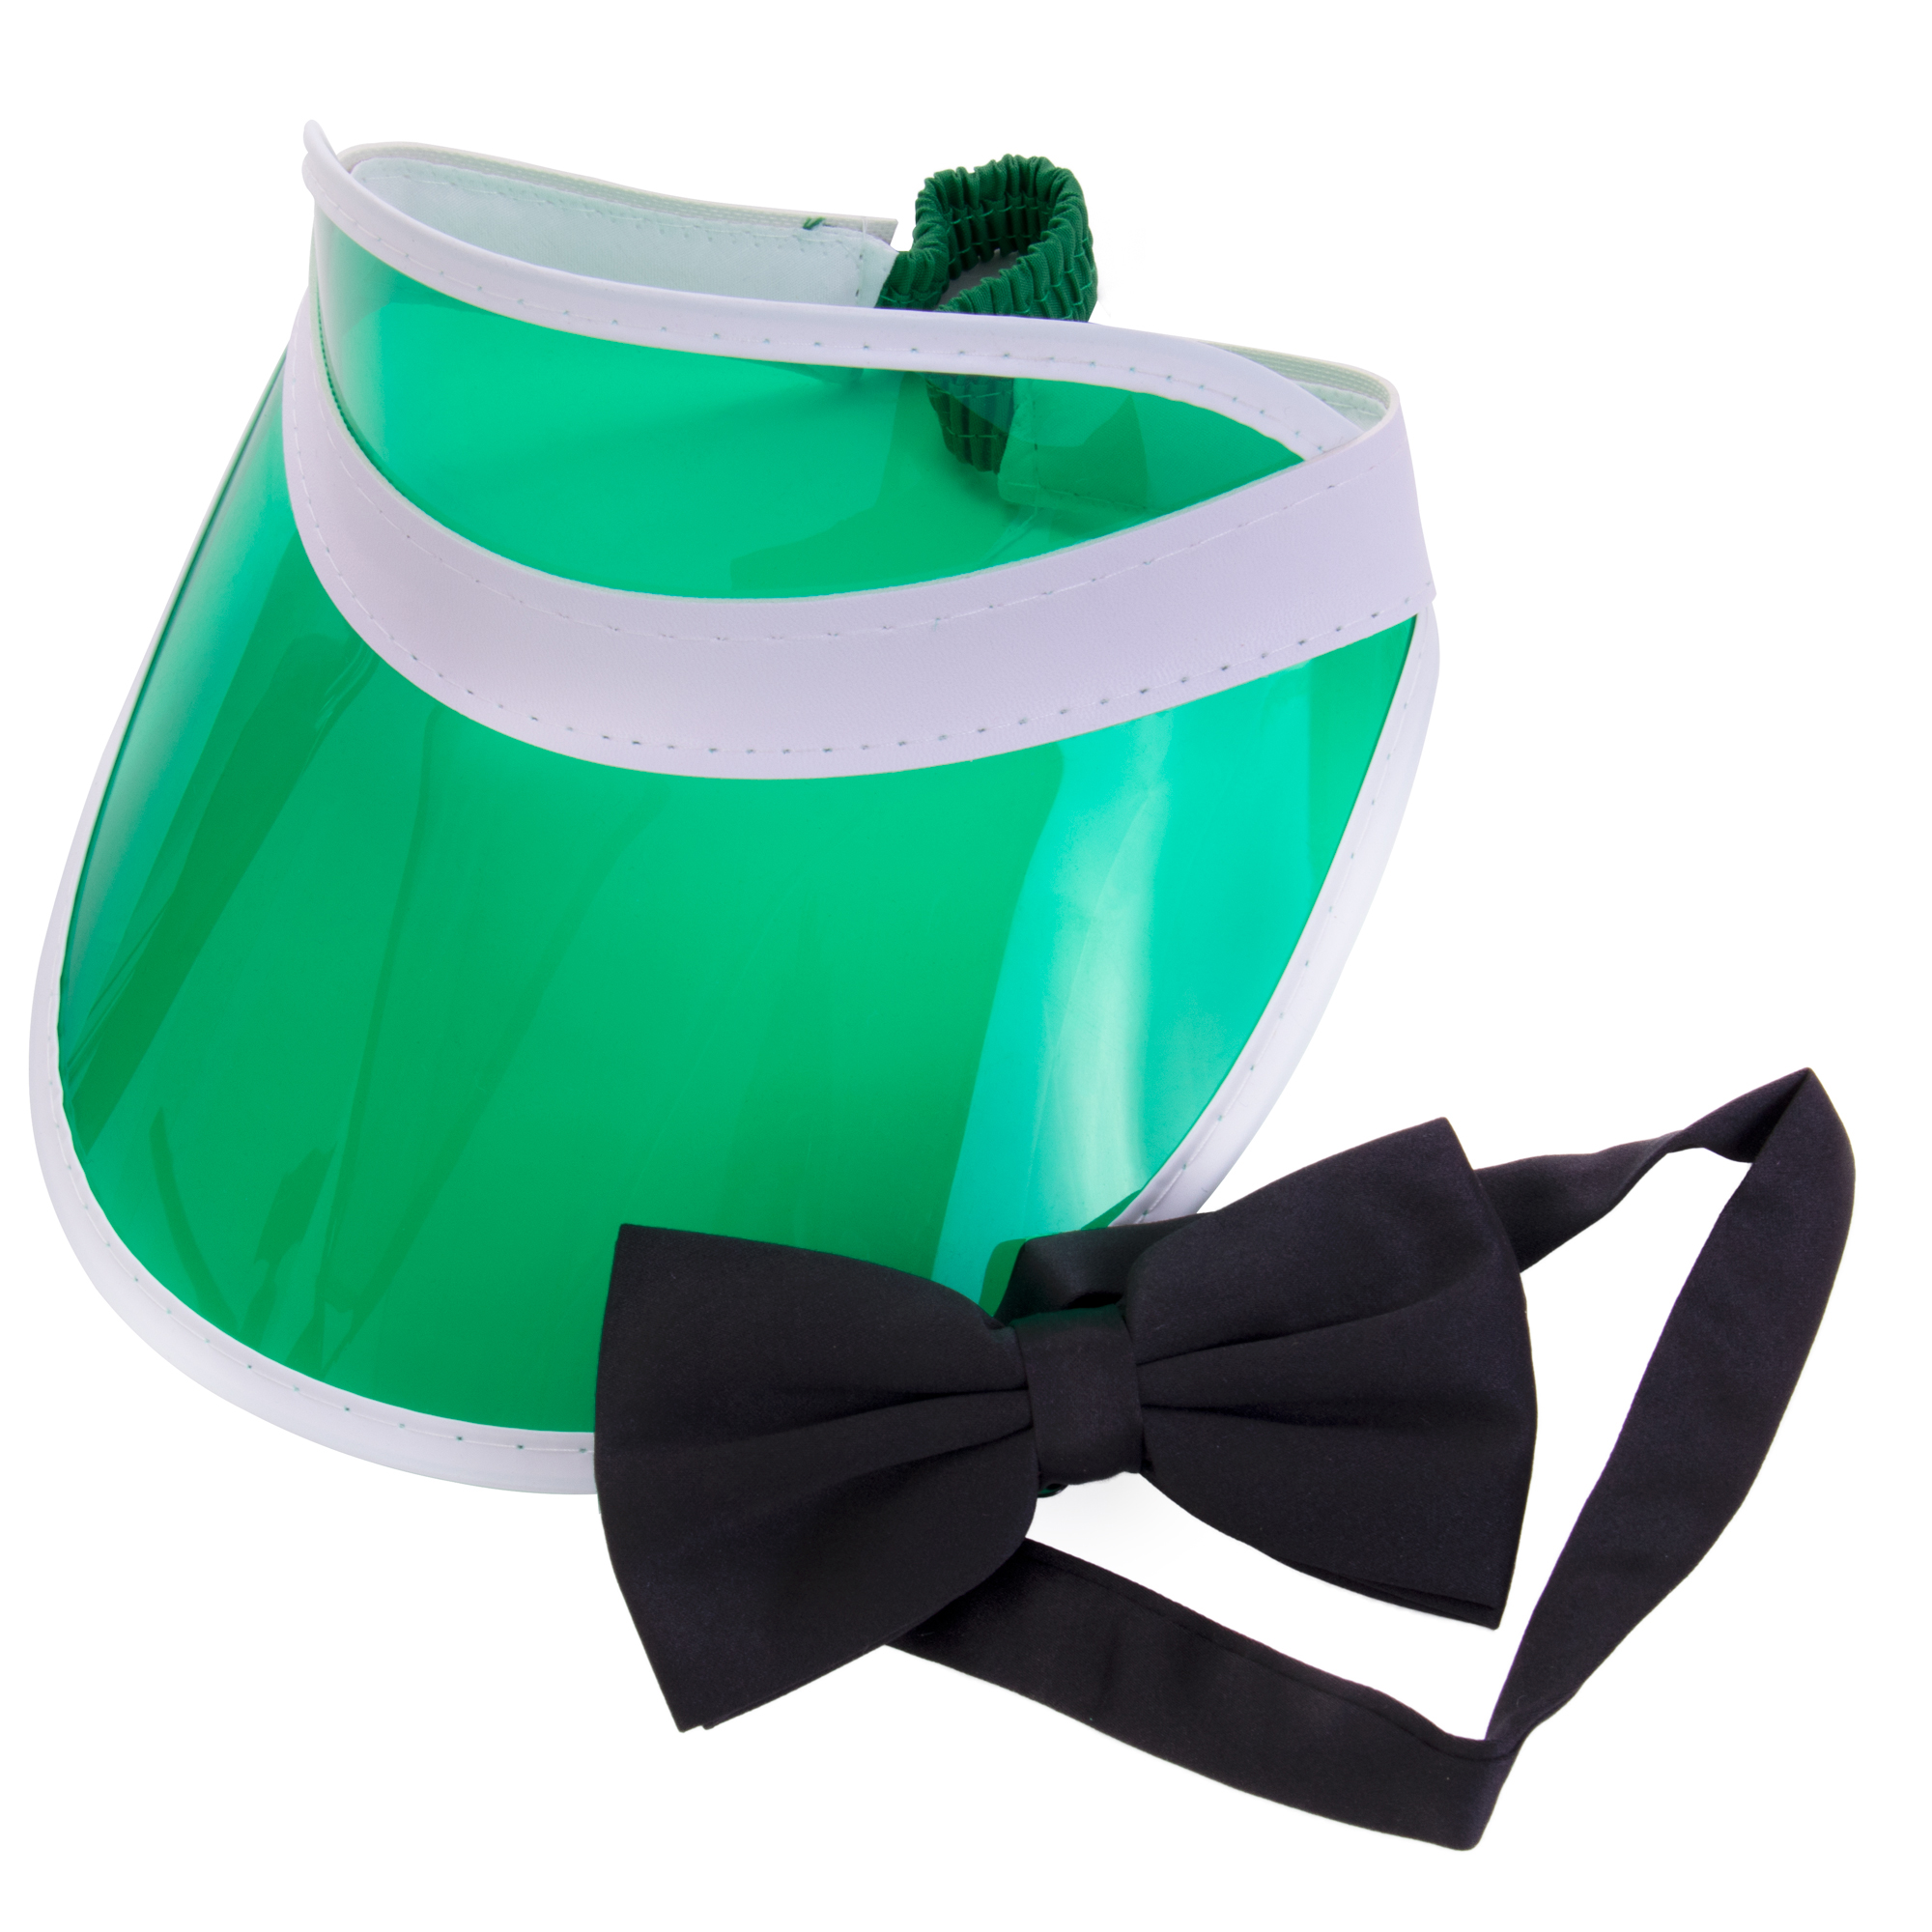 Brybelly Casino Dealer Accessory Pack - Bundle Includes Green Dealing Visor and Fancy Bowtie - Great for Poker Dealer Costume, Uniform for Las Vegas Game Nights - Blackjack Card Deal Outfit - image 1 of 6